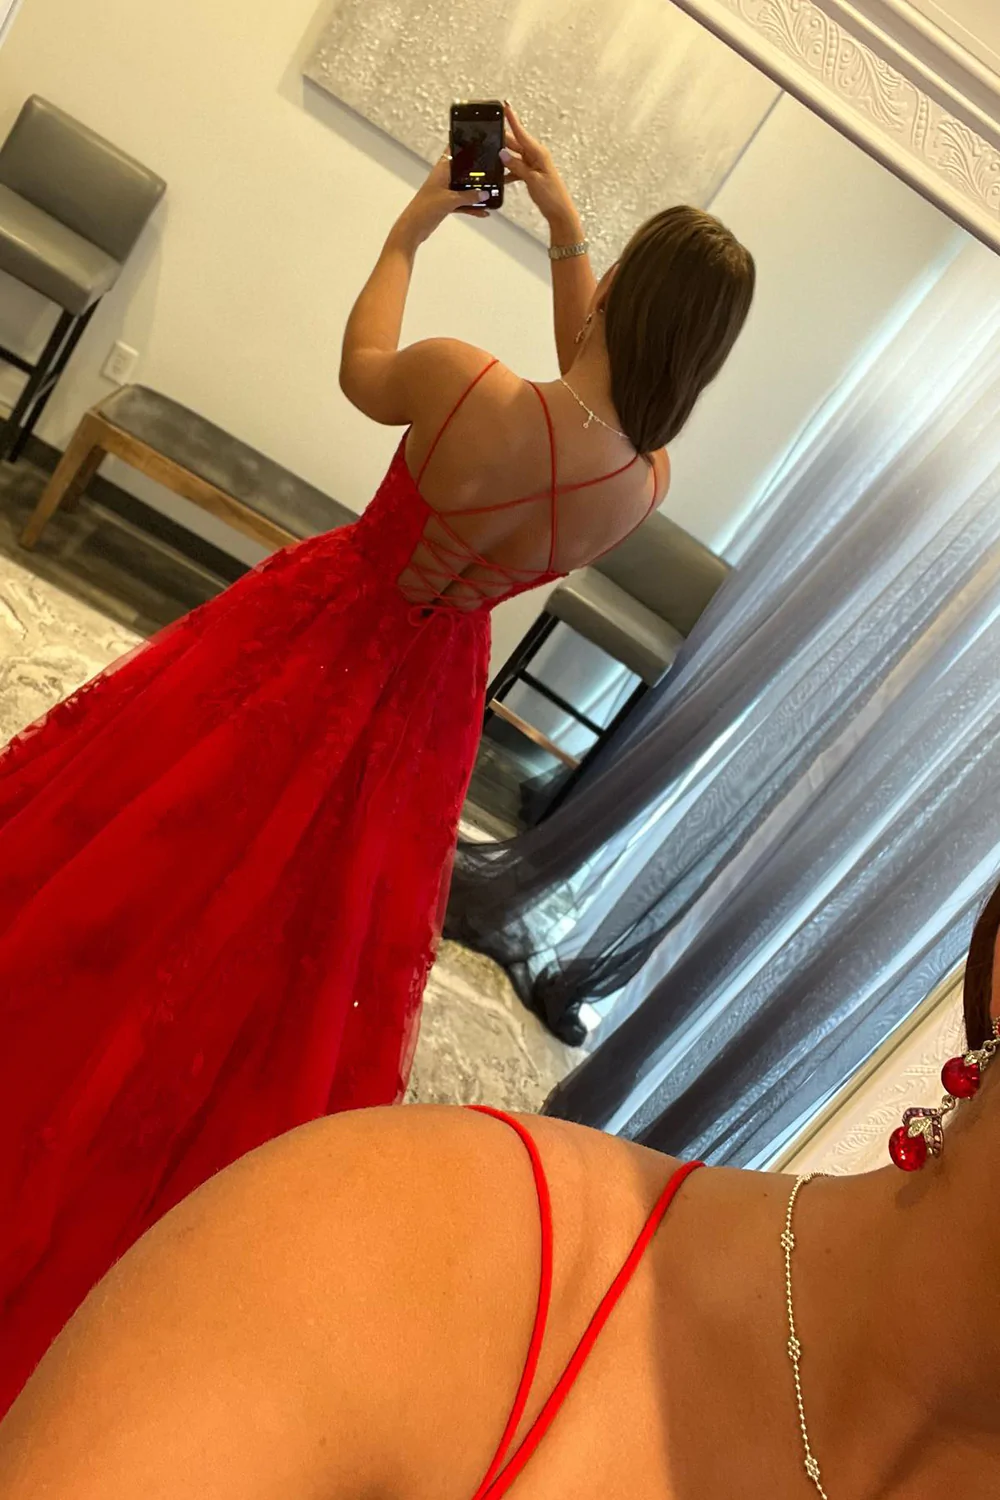 Red Spaghetti Straps Long Prom Dress with Appliques       fg2376